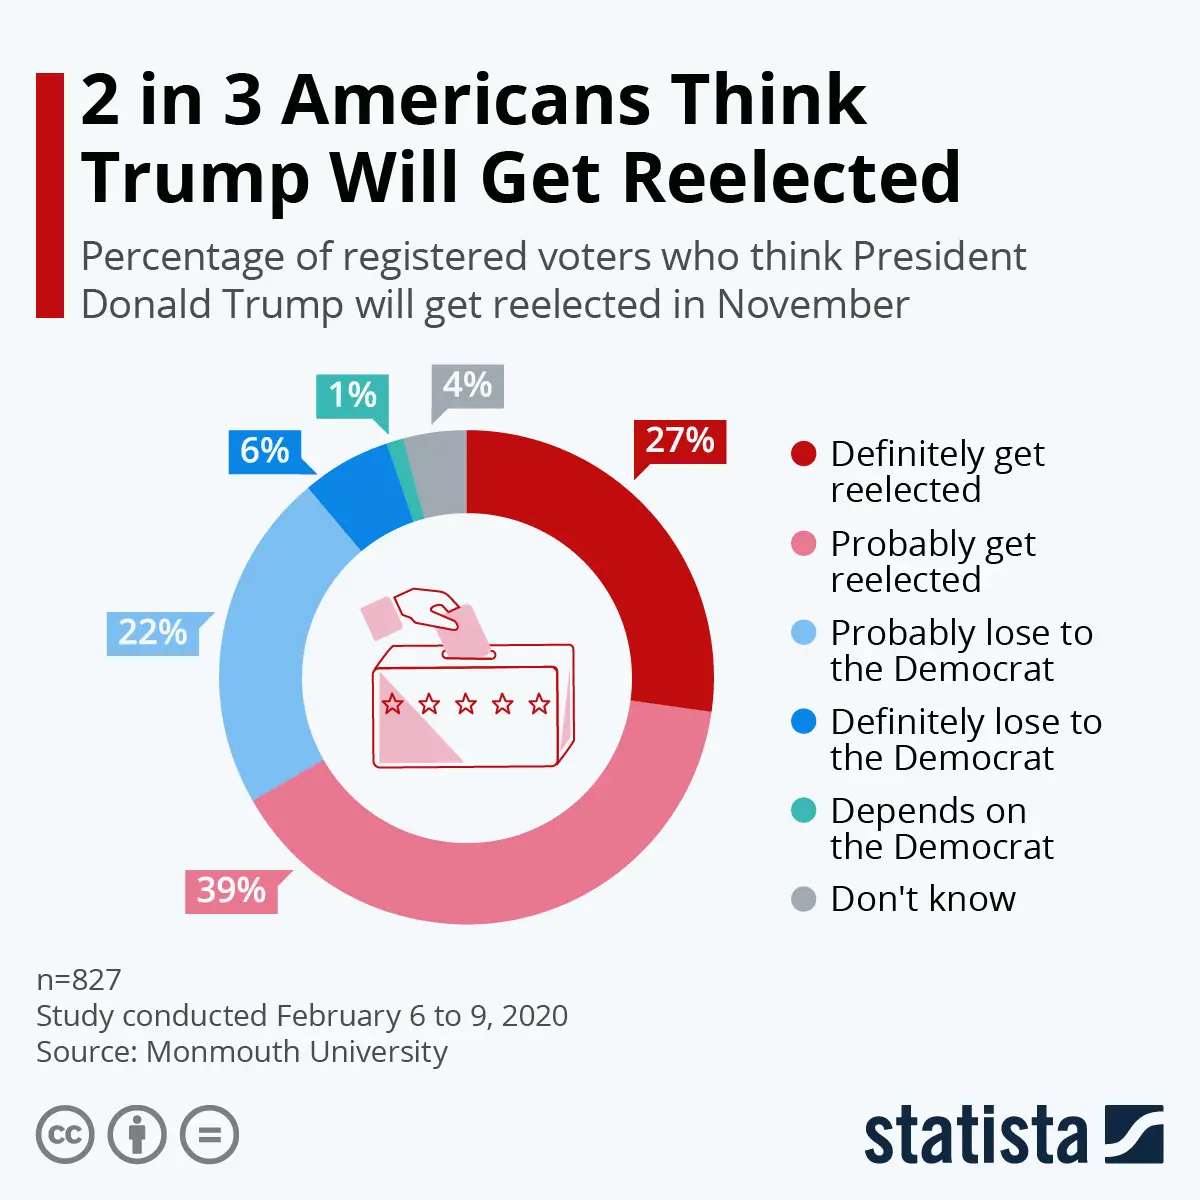 Chart: 2 in 3 Americans Think Trump Will Get Reelected